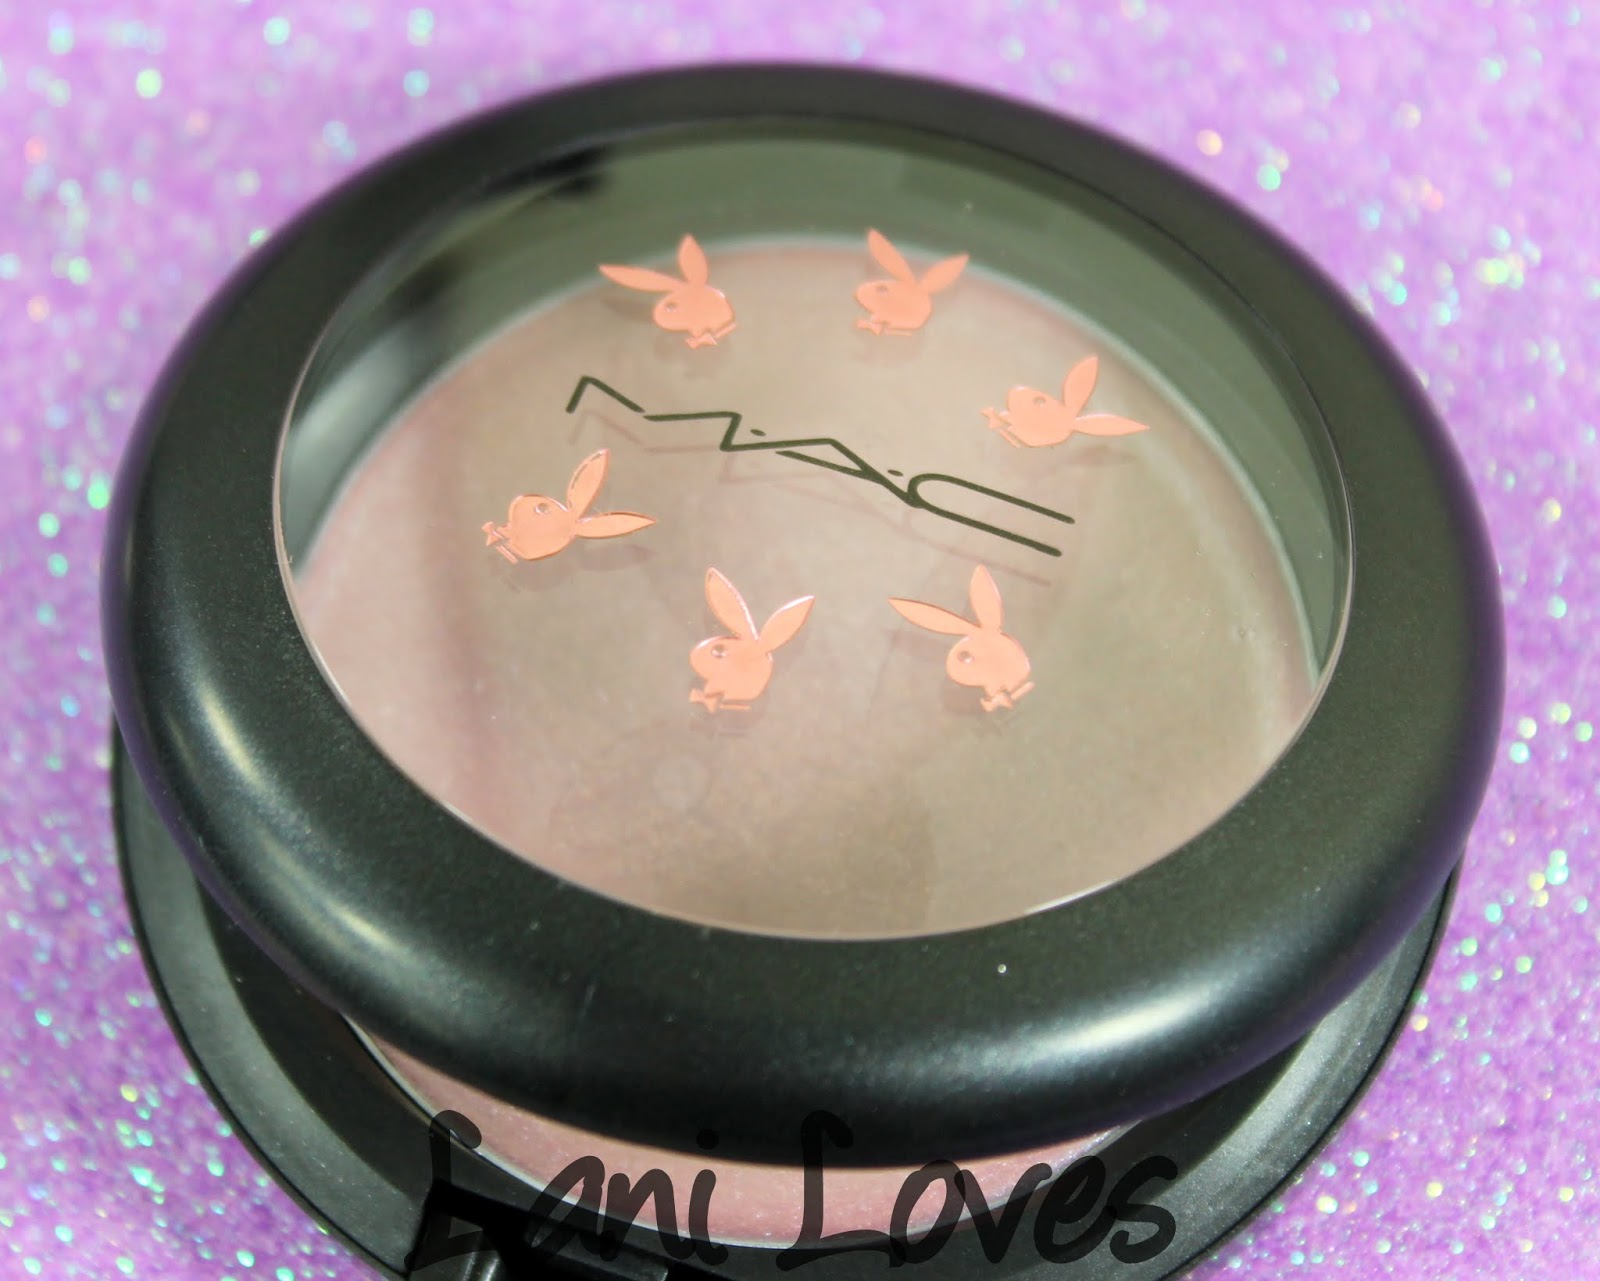 MAC For Playboy - Playmate Pink Glitter Cream Swatches & Review